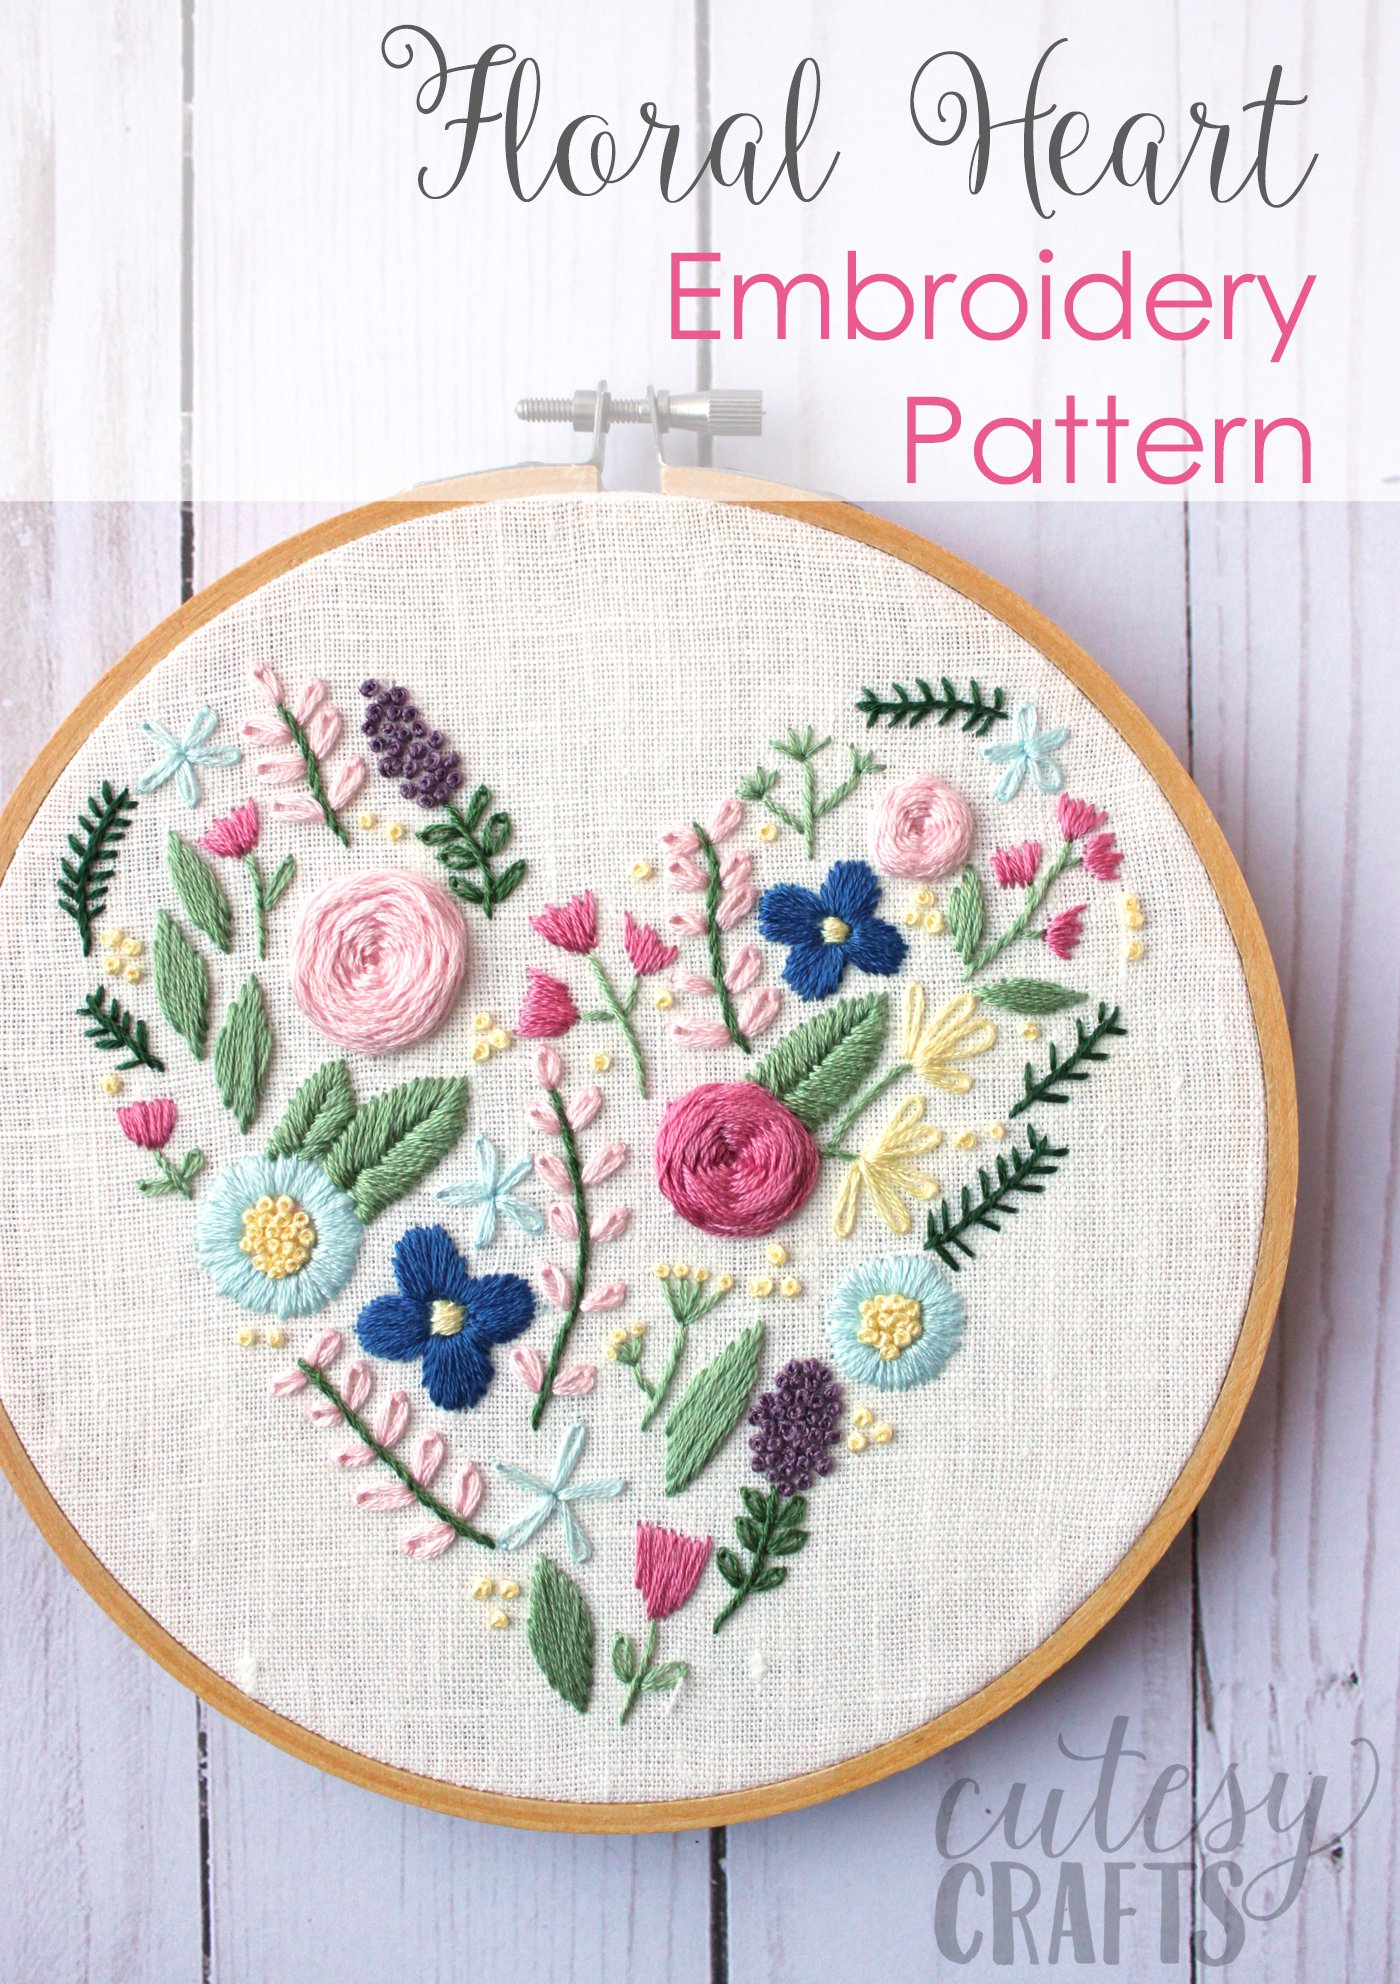 Embroidery For Beginners Free Patterns Floral Heart Hand Embroidery Pattern The Polka Dot Chair